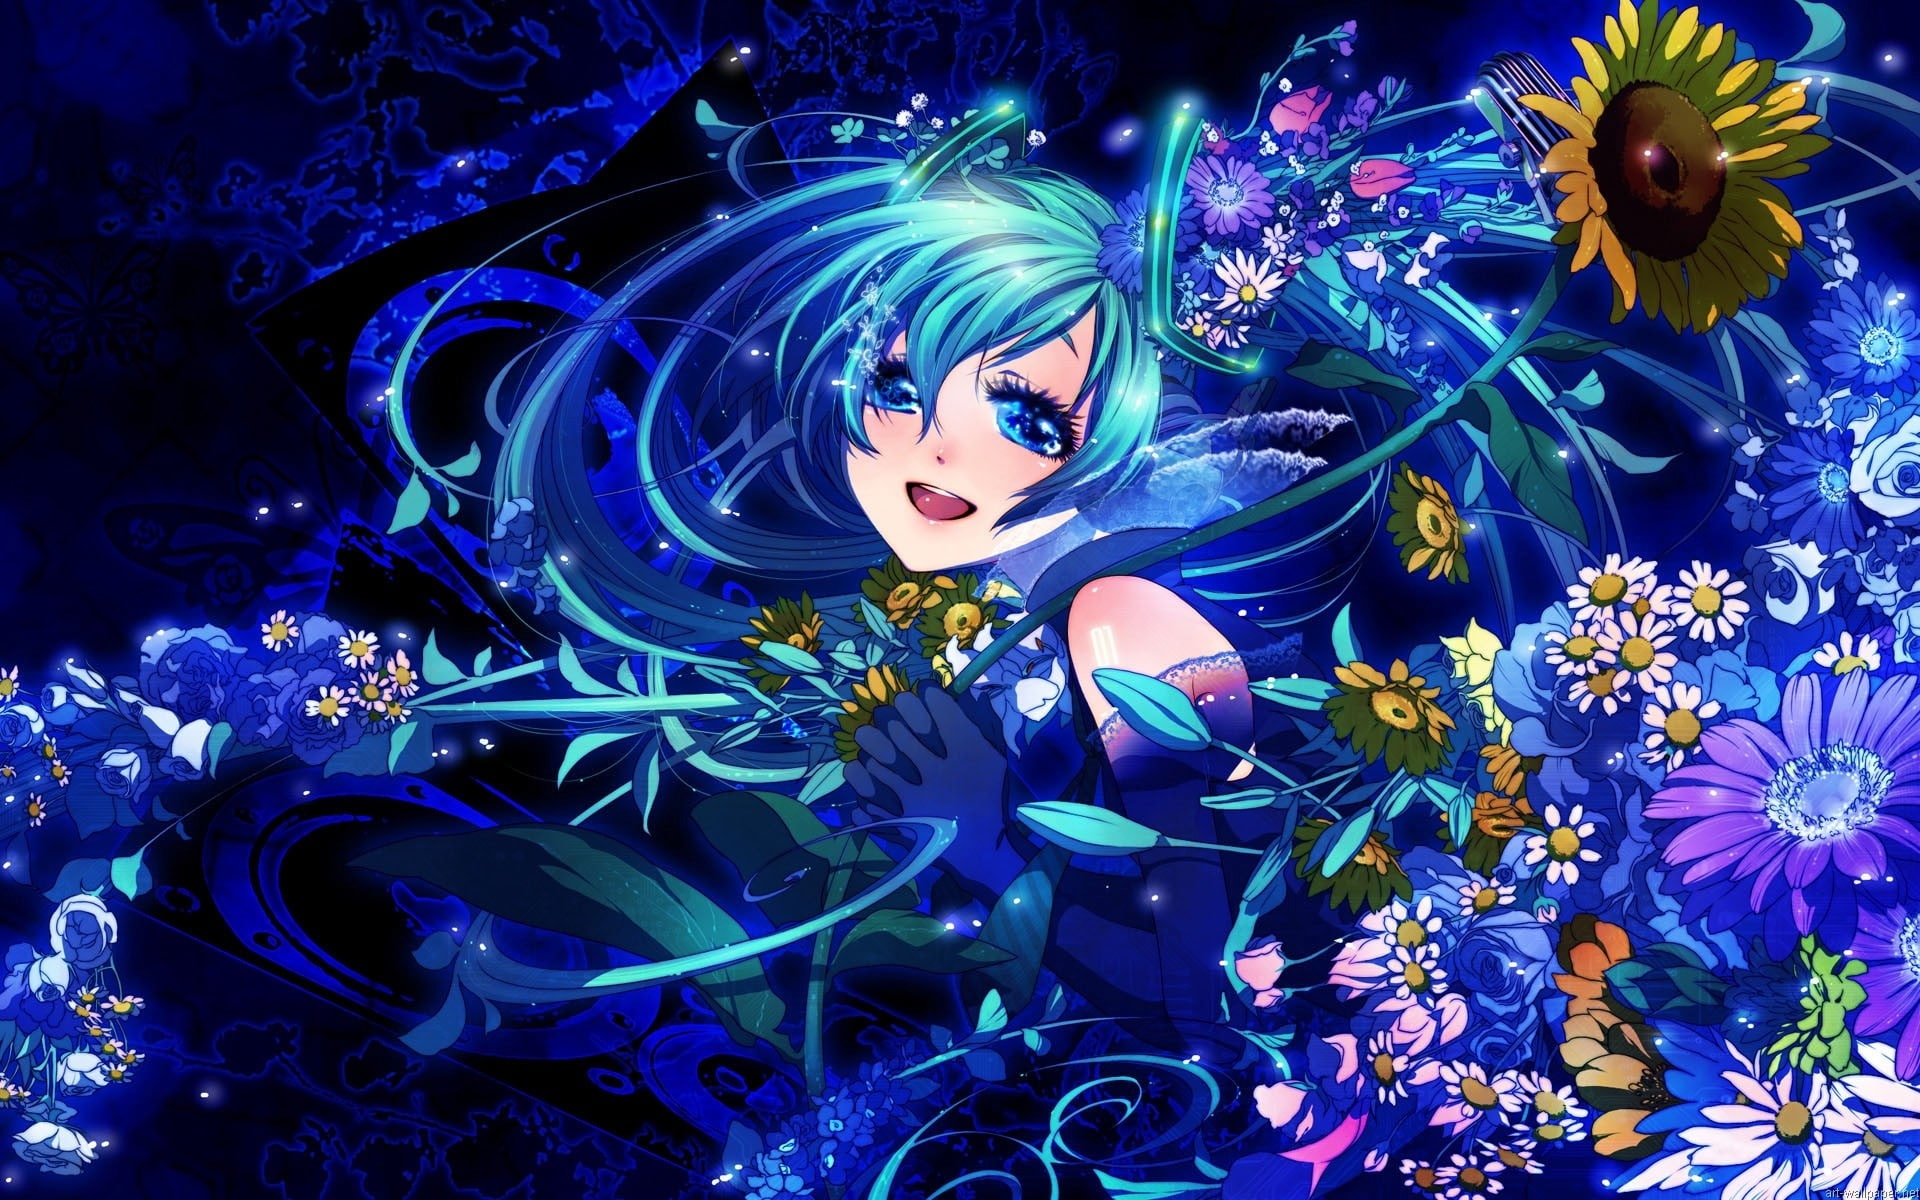 8. "Drawing of girl with blue hair and flowers" - wide 6